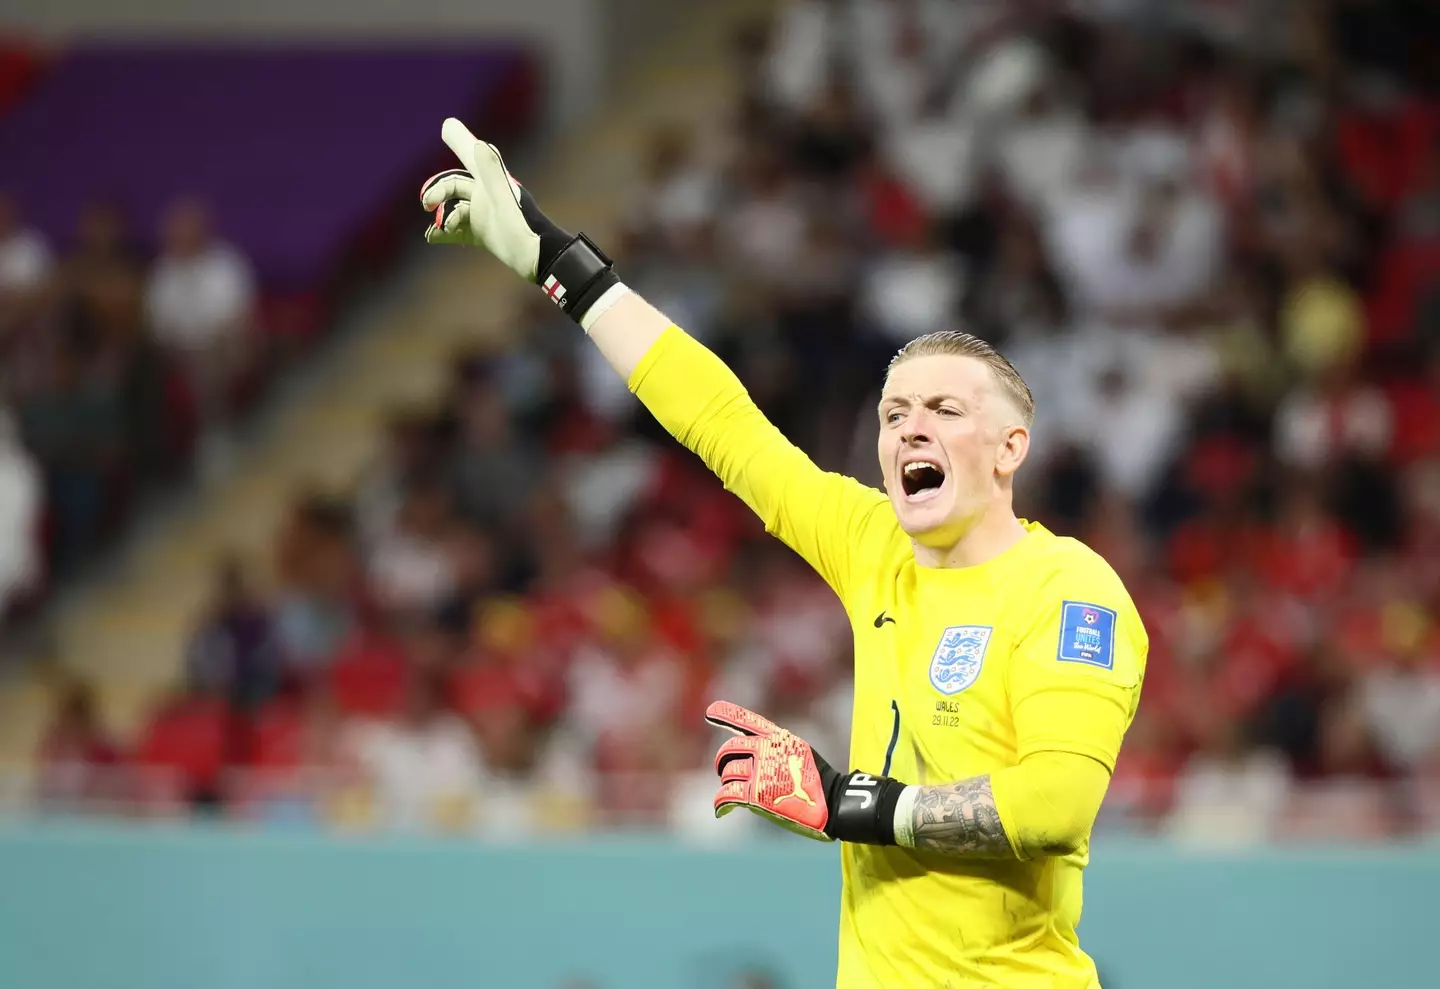 Pickford is England's starting goalkeeper. (Image